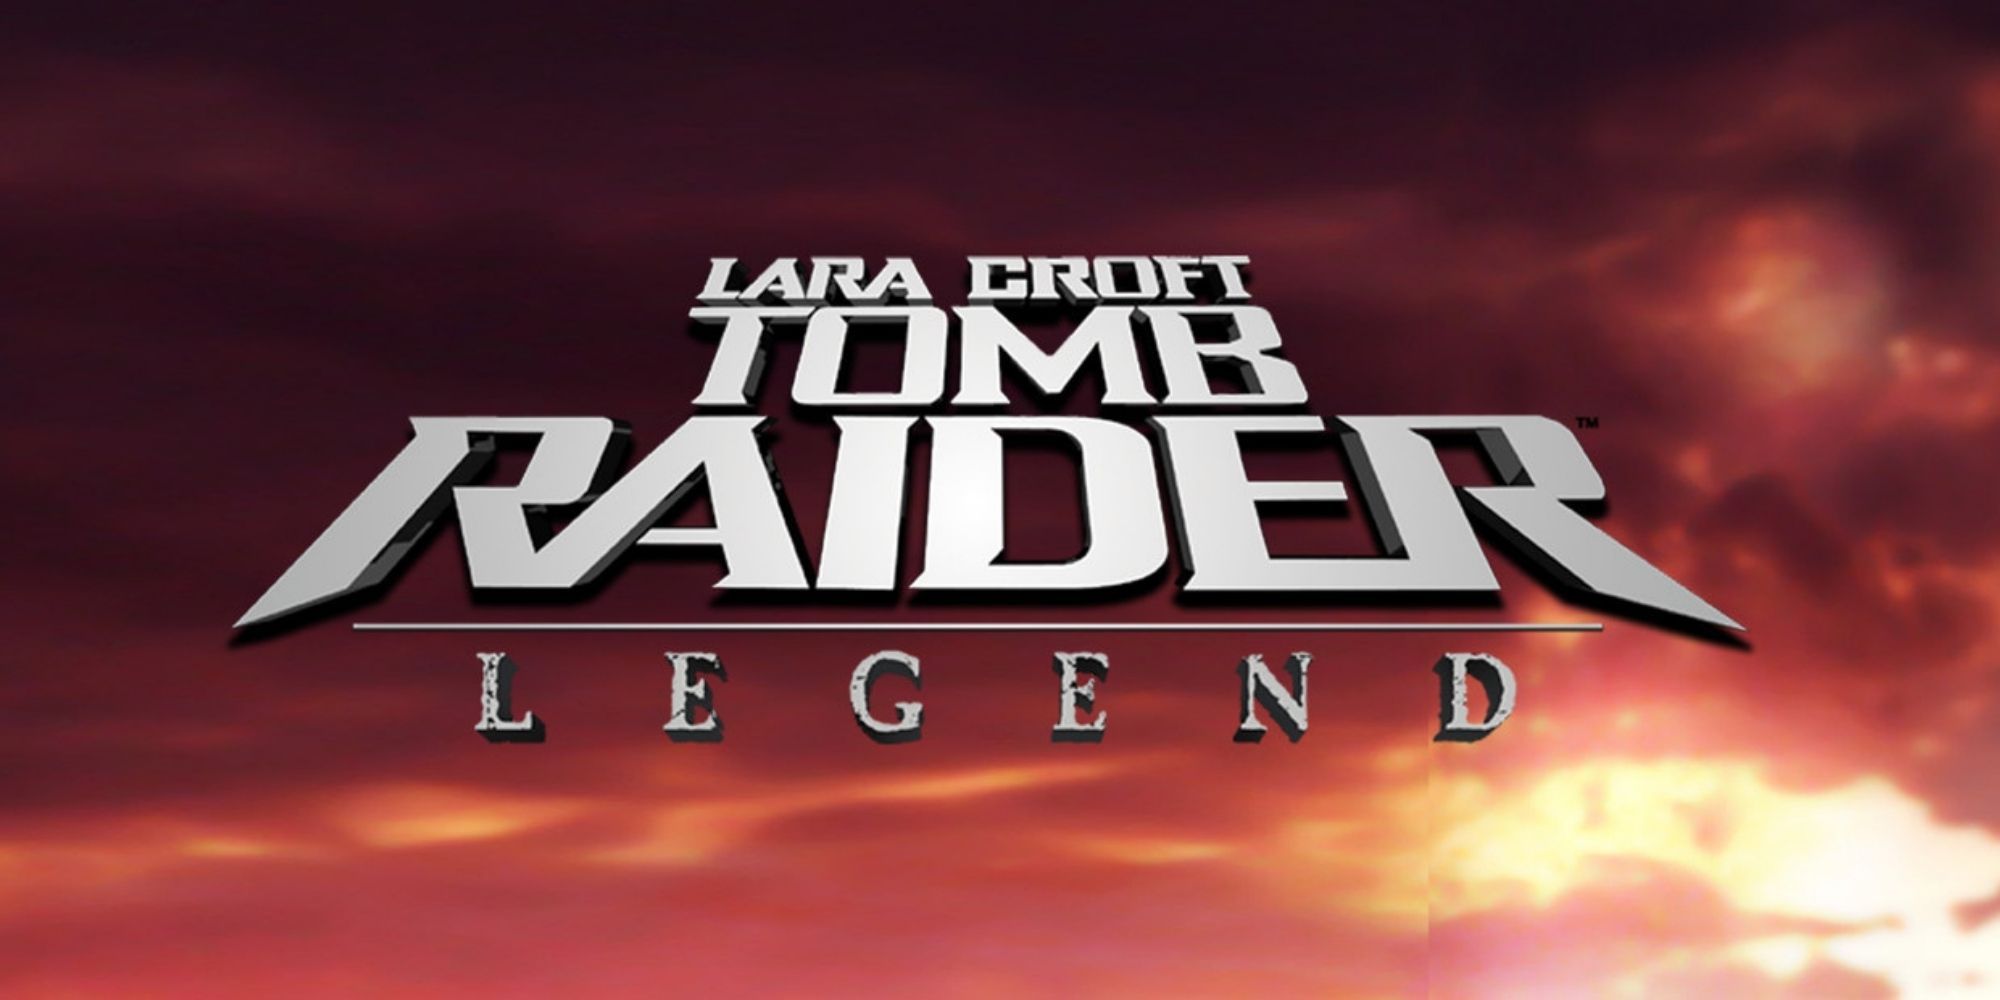 Tomb Raider: Legend Titles Over A Stormy Red Sky